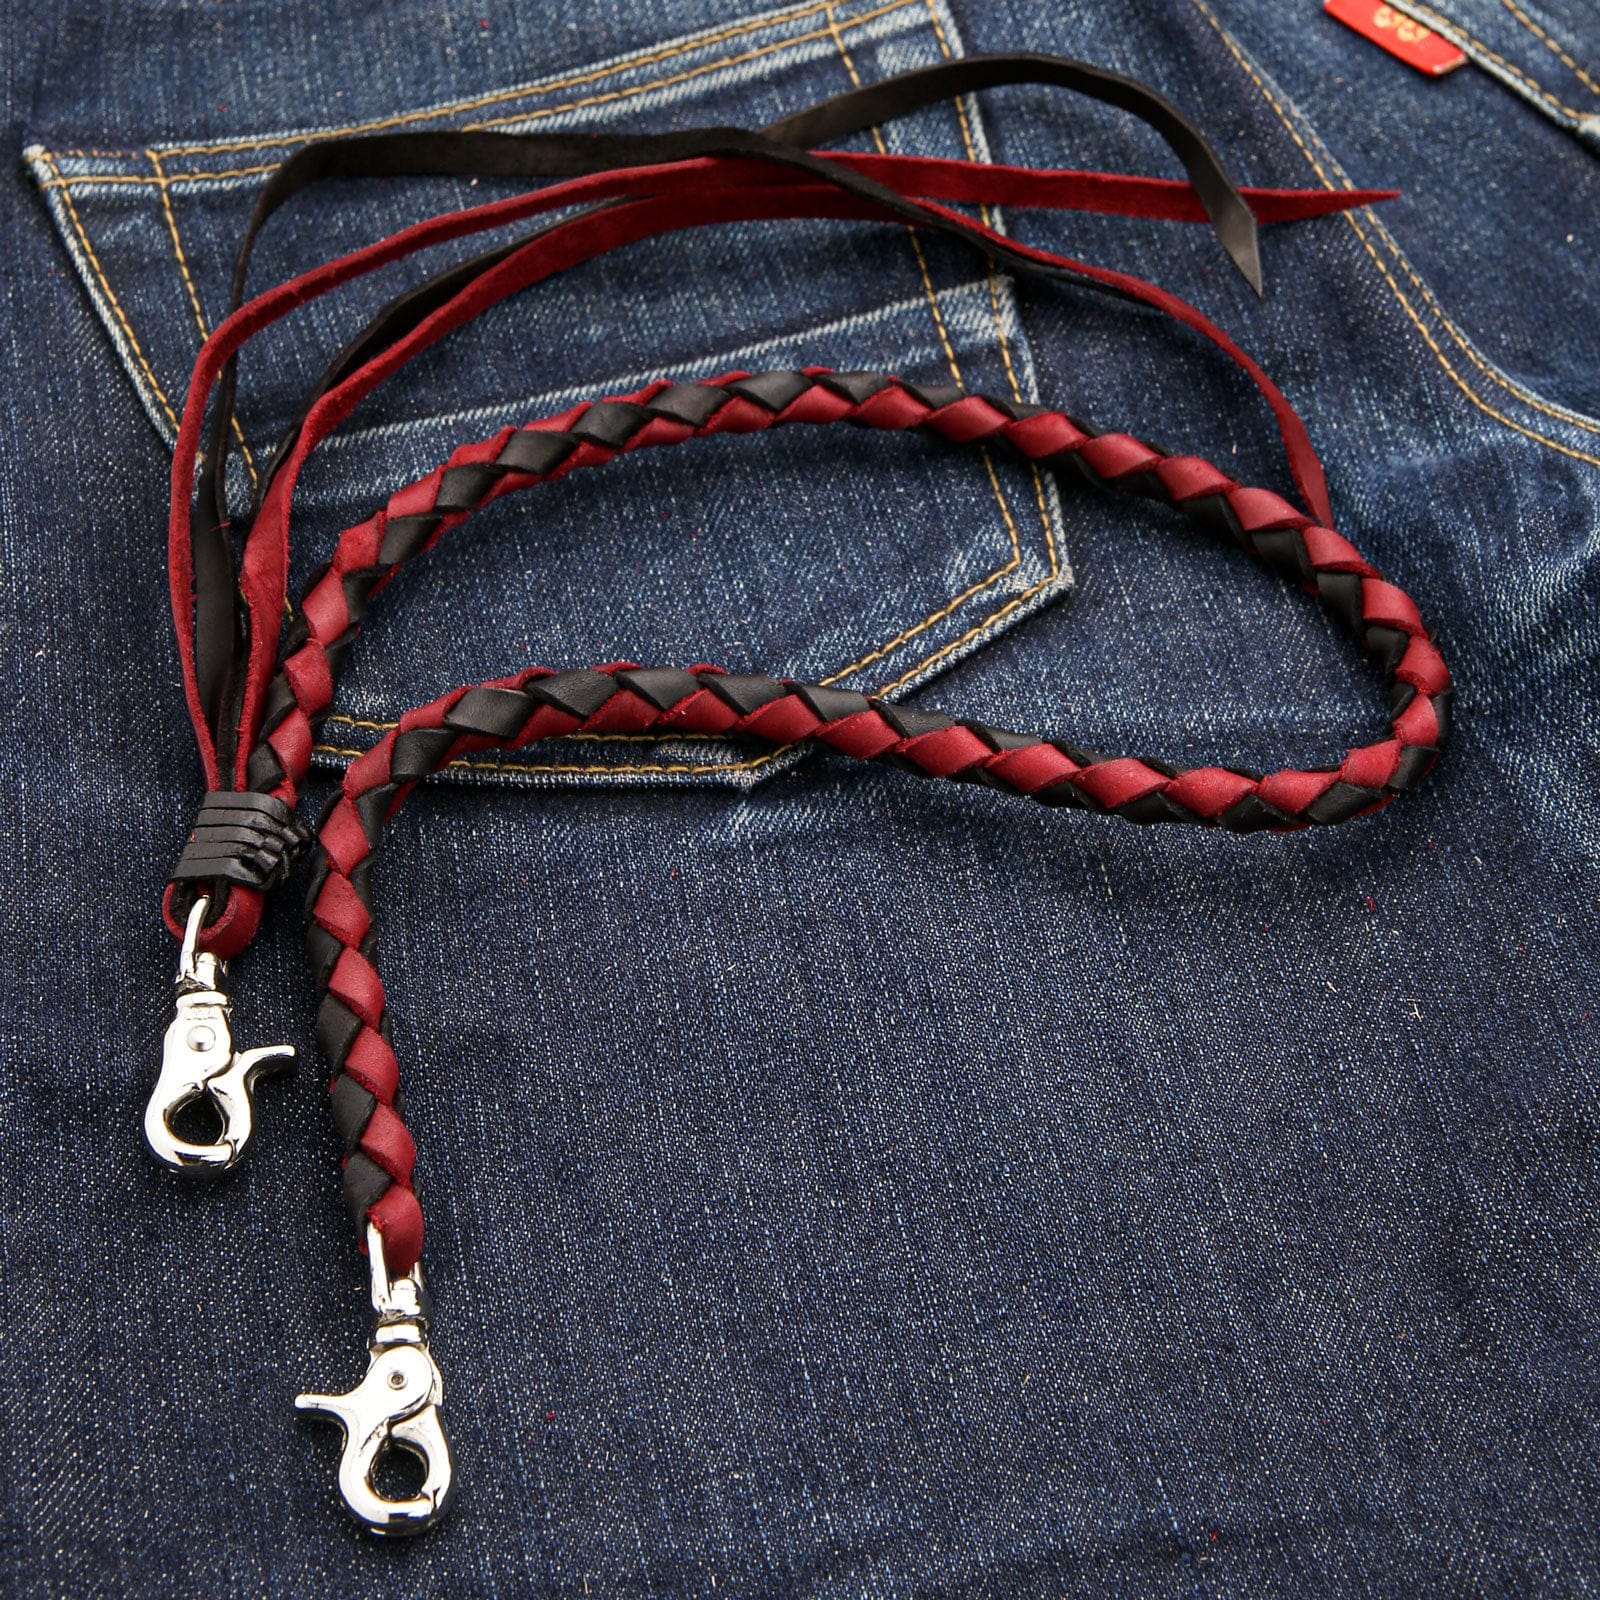 Genuine Leather Chain Strap High-quality Leather Strap With 